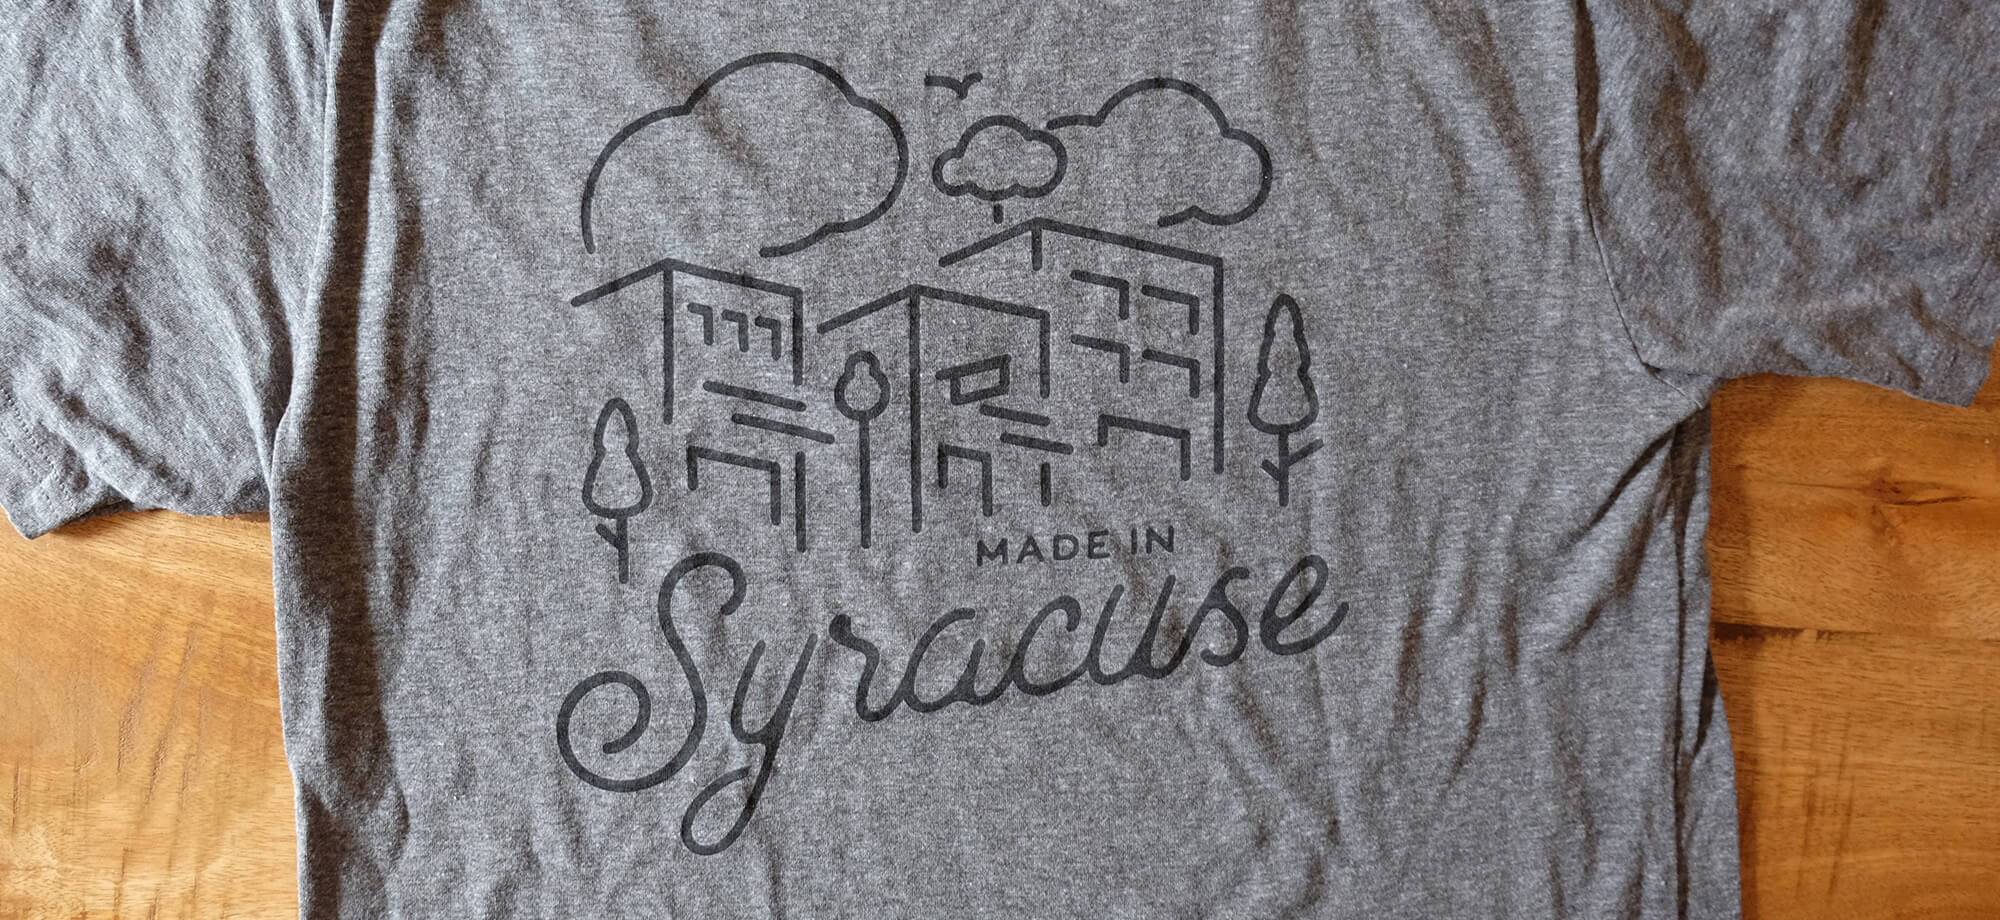 a gray tee on a wood table. the tee reads “Made in Syracuse”